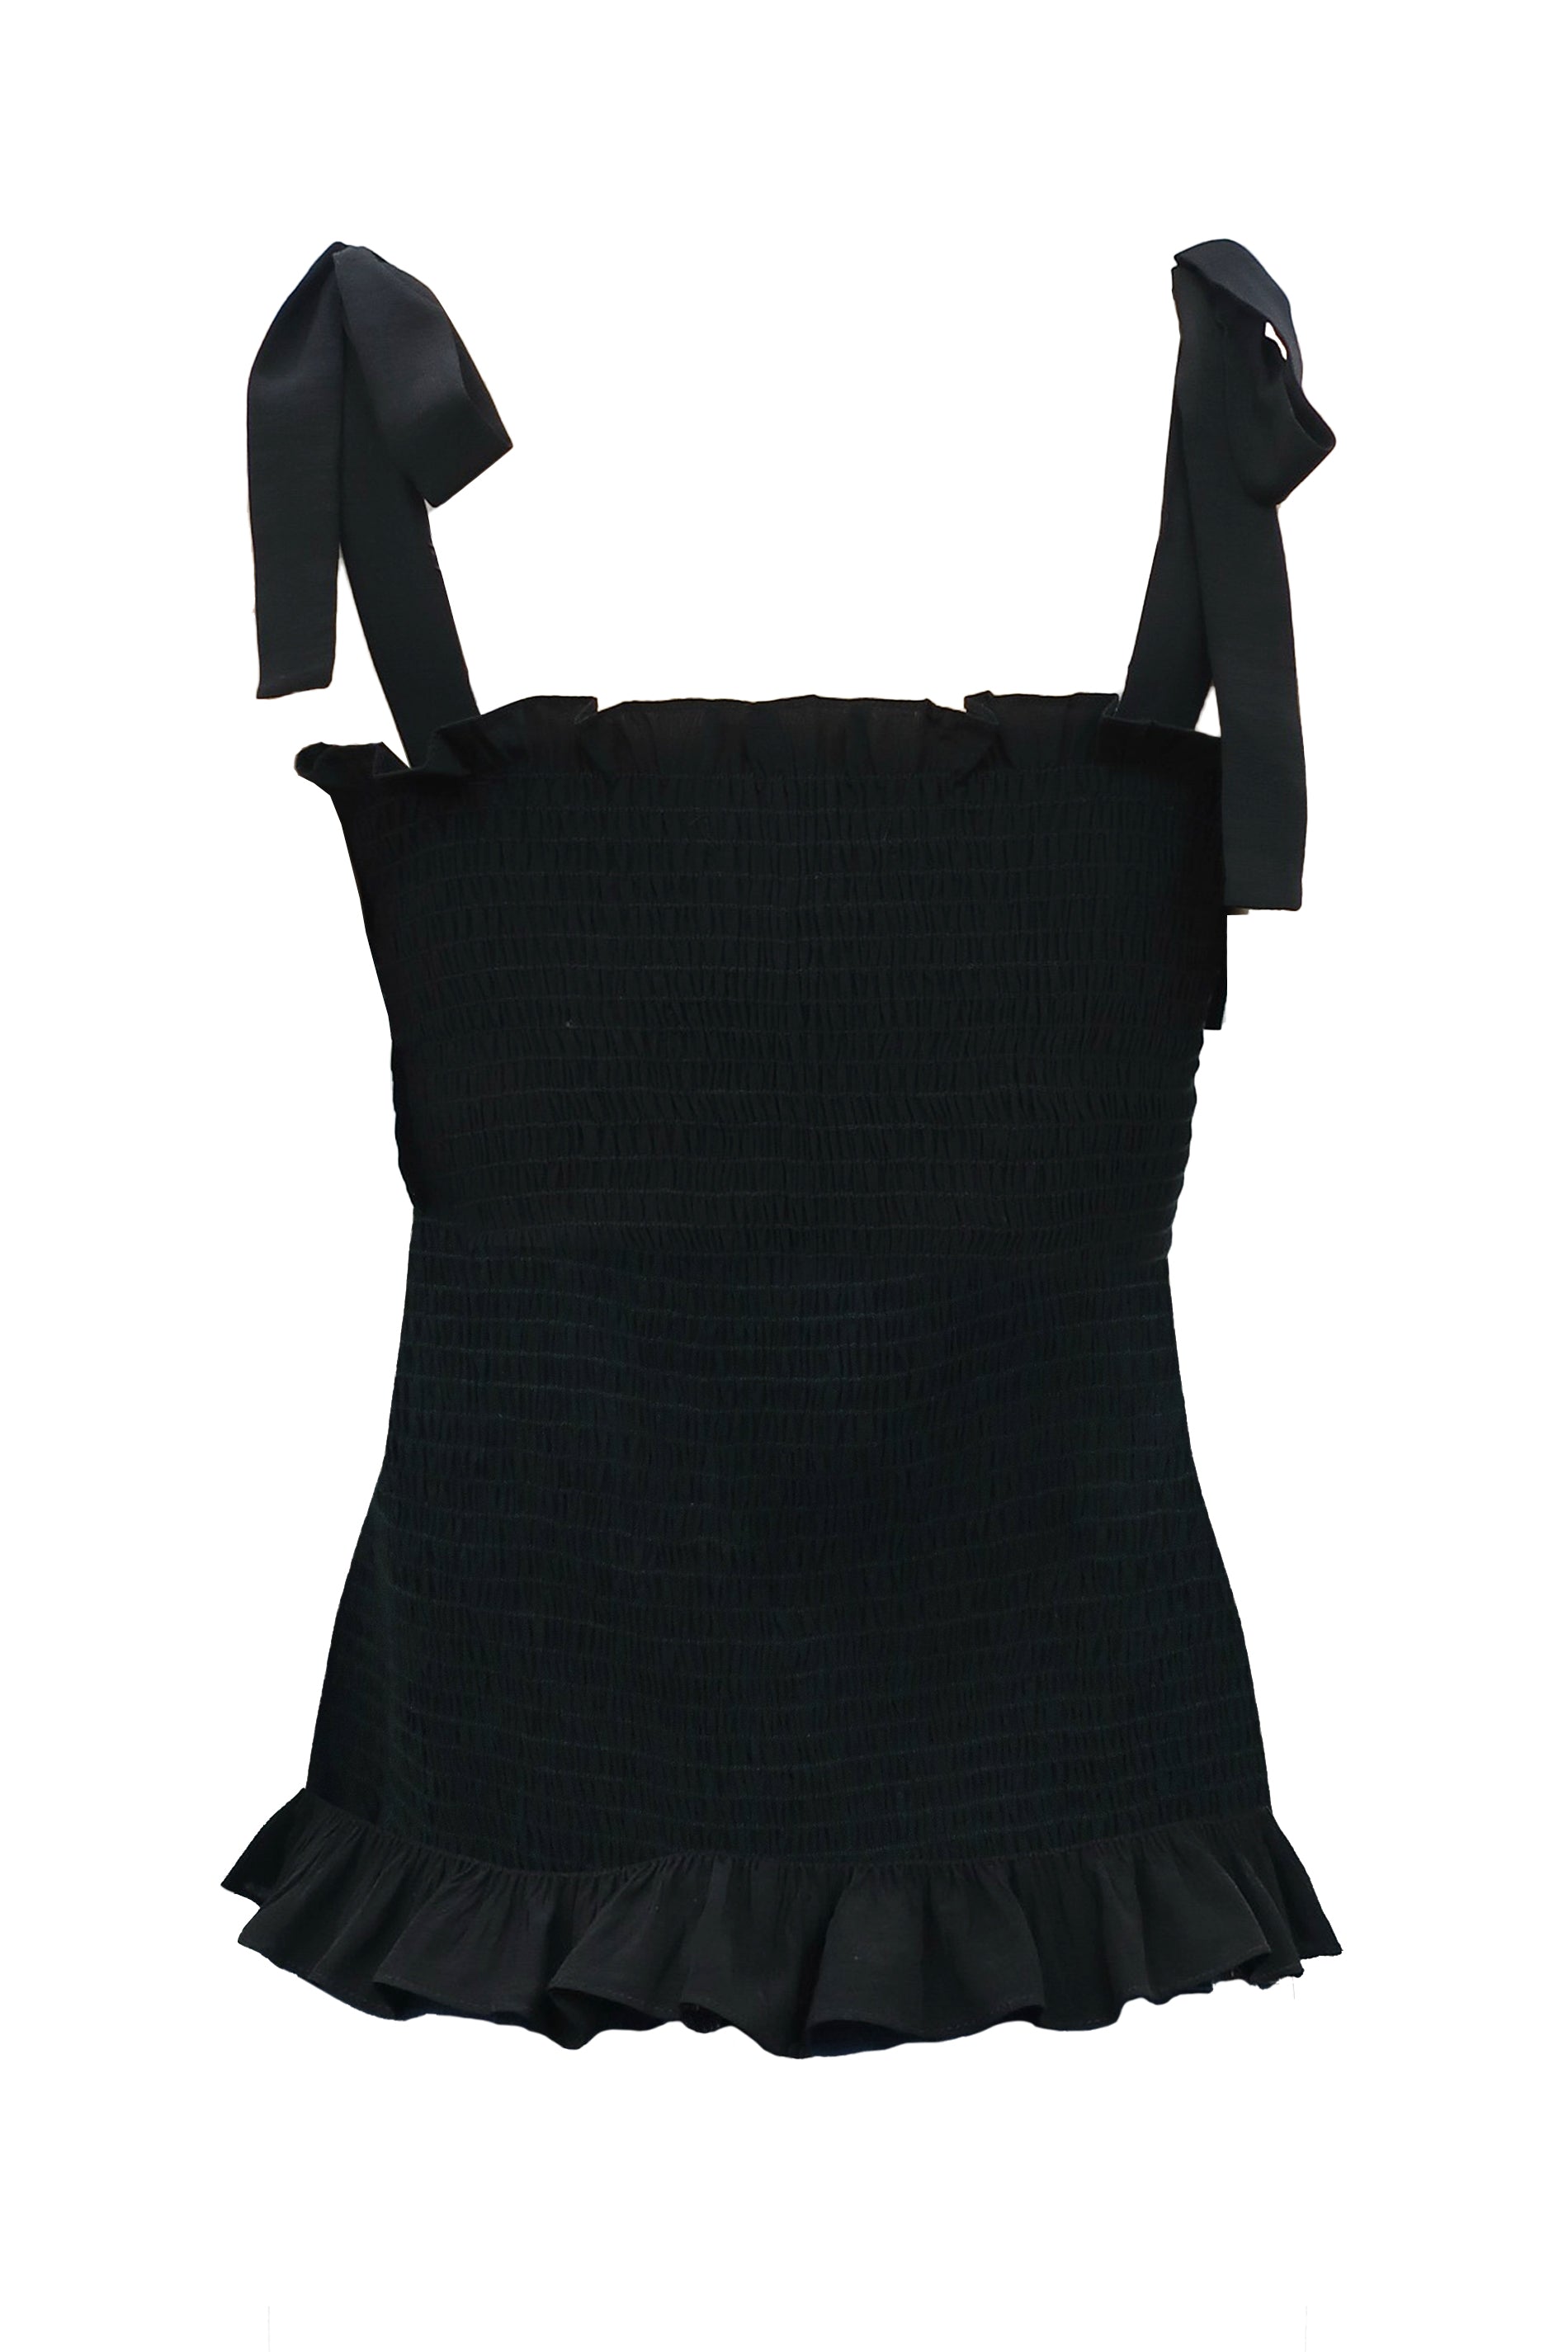 Holy Moly Stretch Sleeveless Top in Black